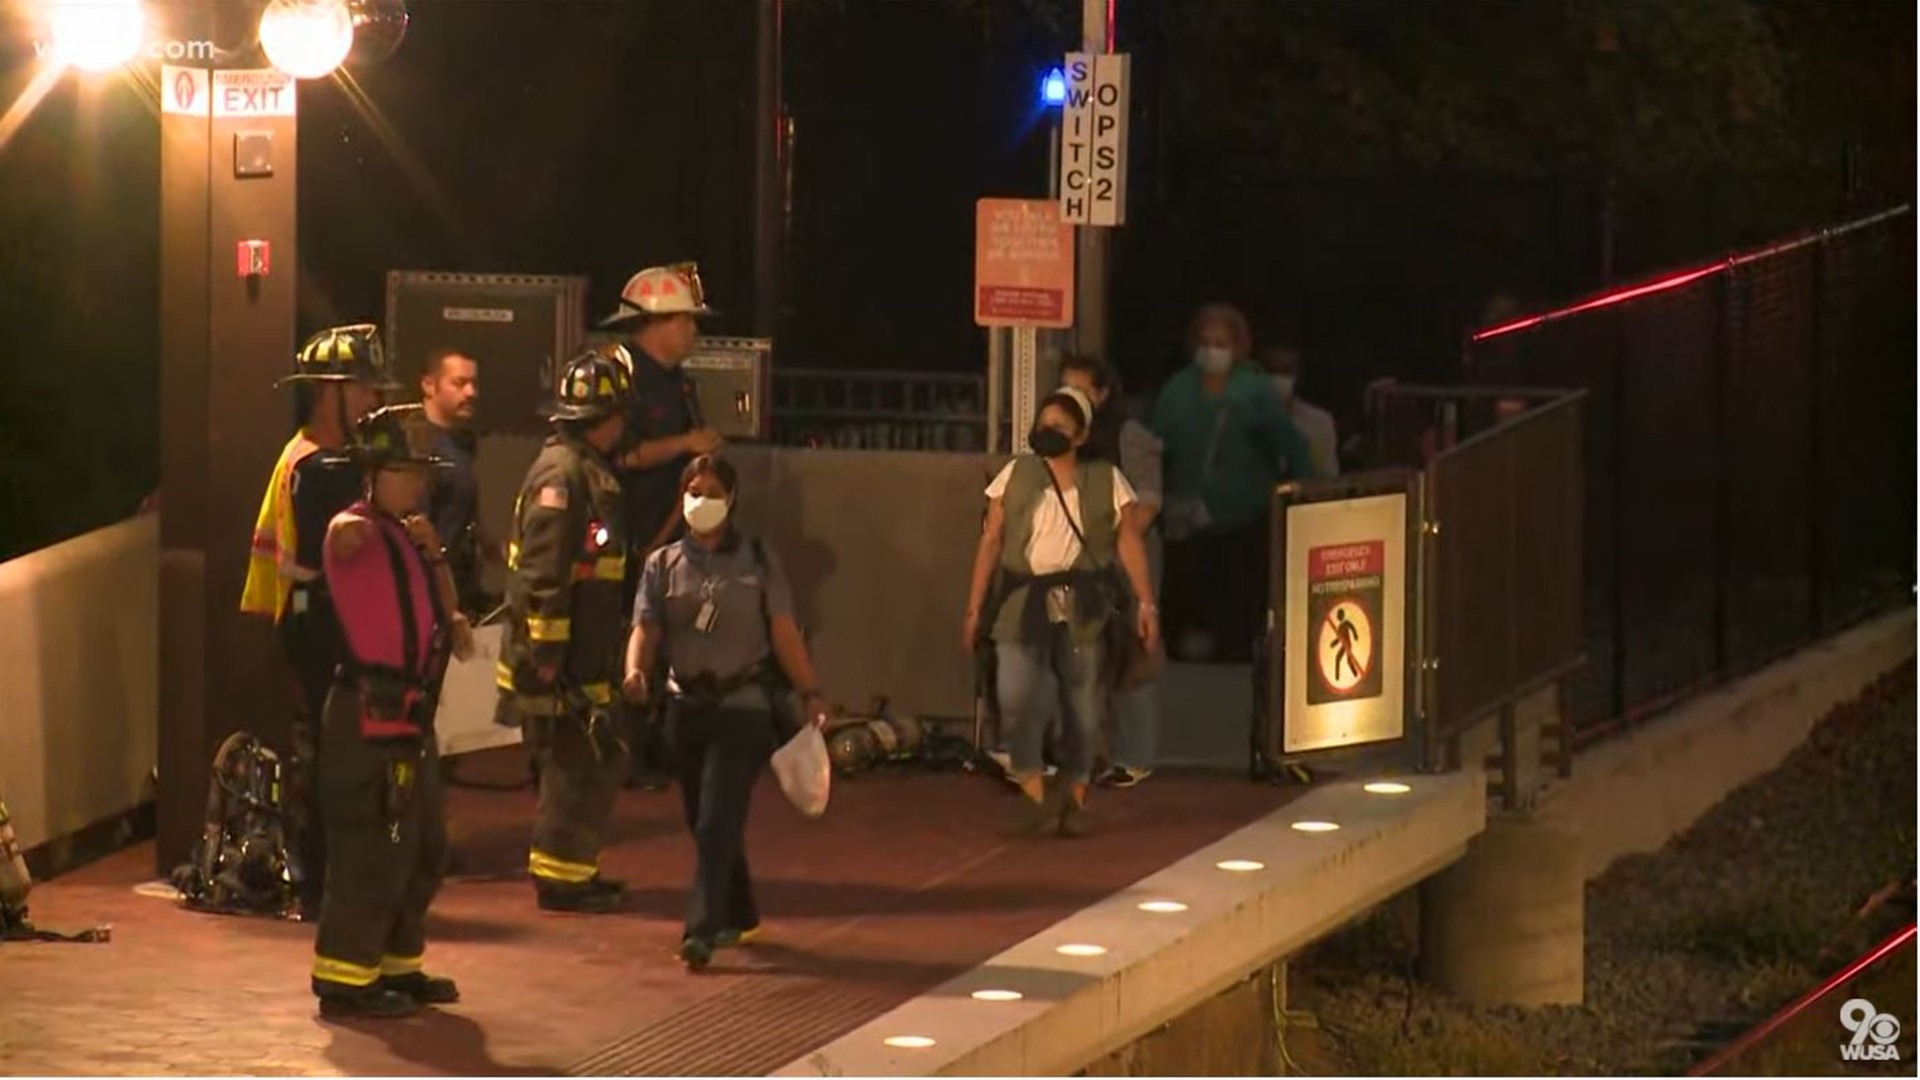 The incident happened just before 5 p.m. when the Blue Line 7000-series train partially derailed in a tunnel between Rosslyn and Arlington Cemetary.